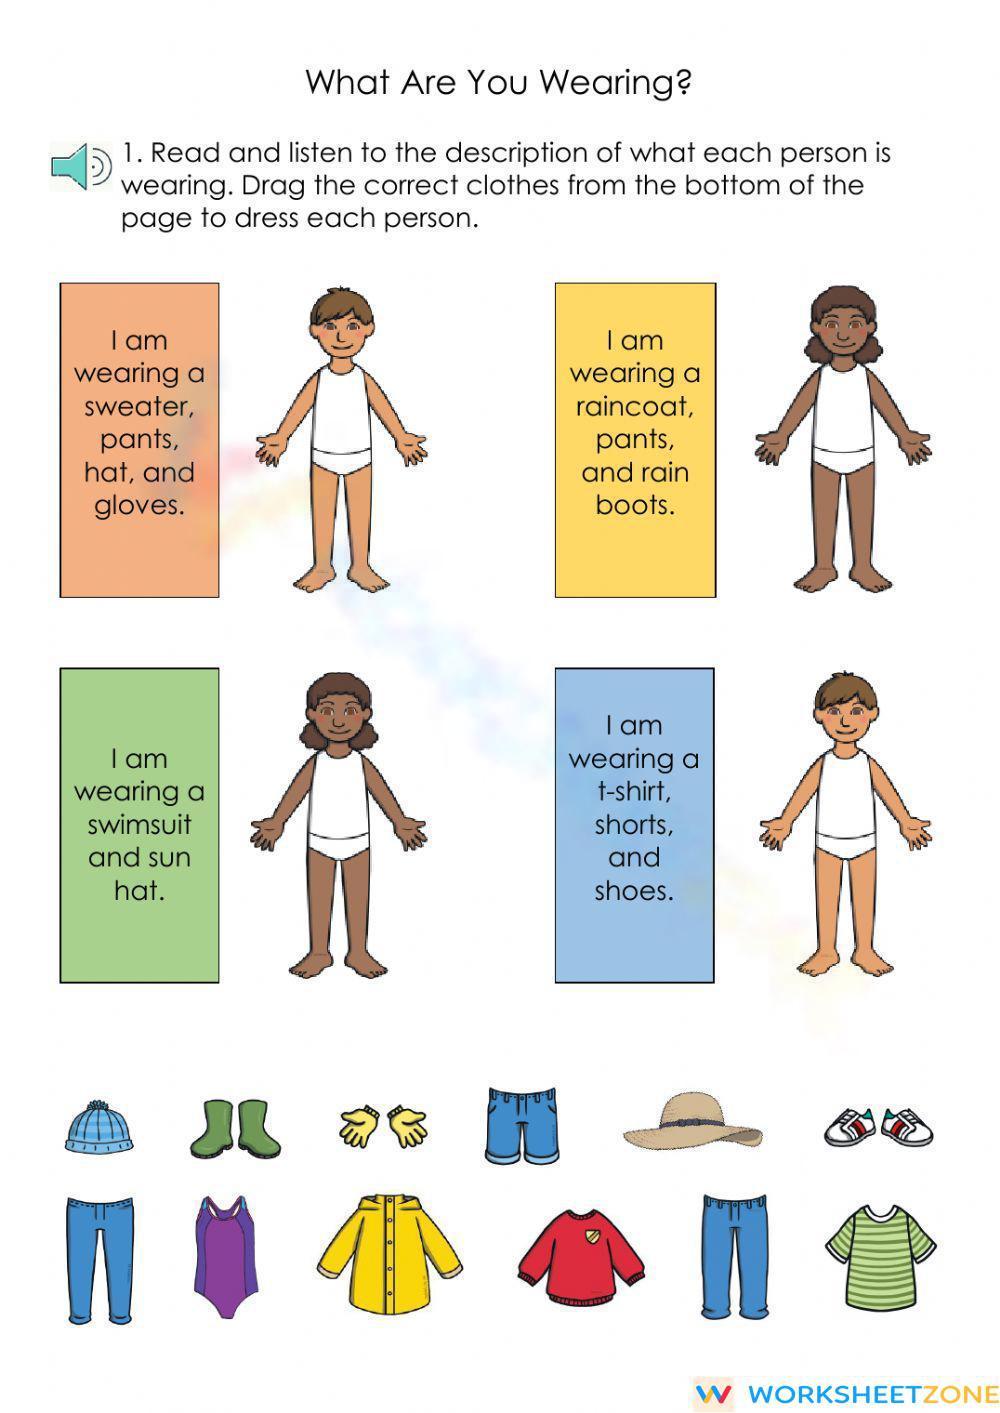 What Are You Wearing? Worksheet